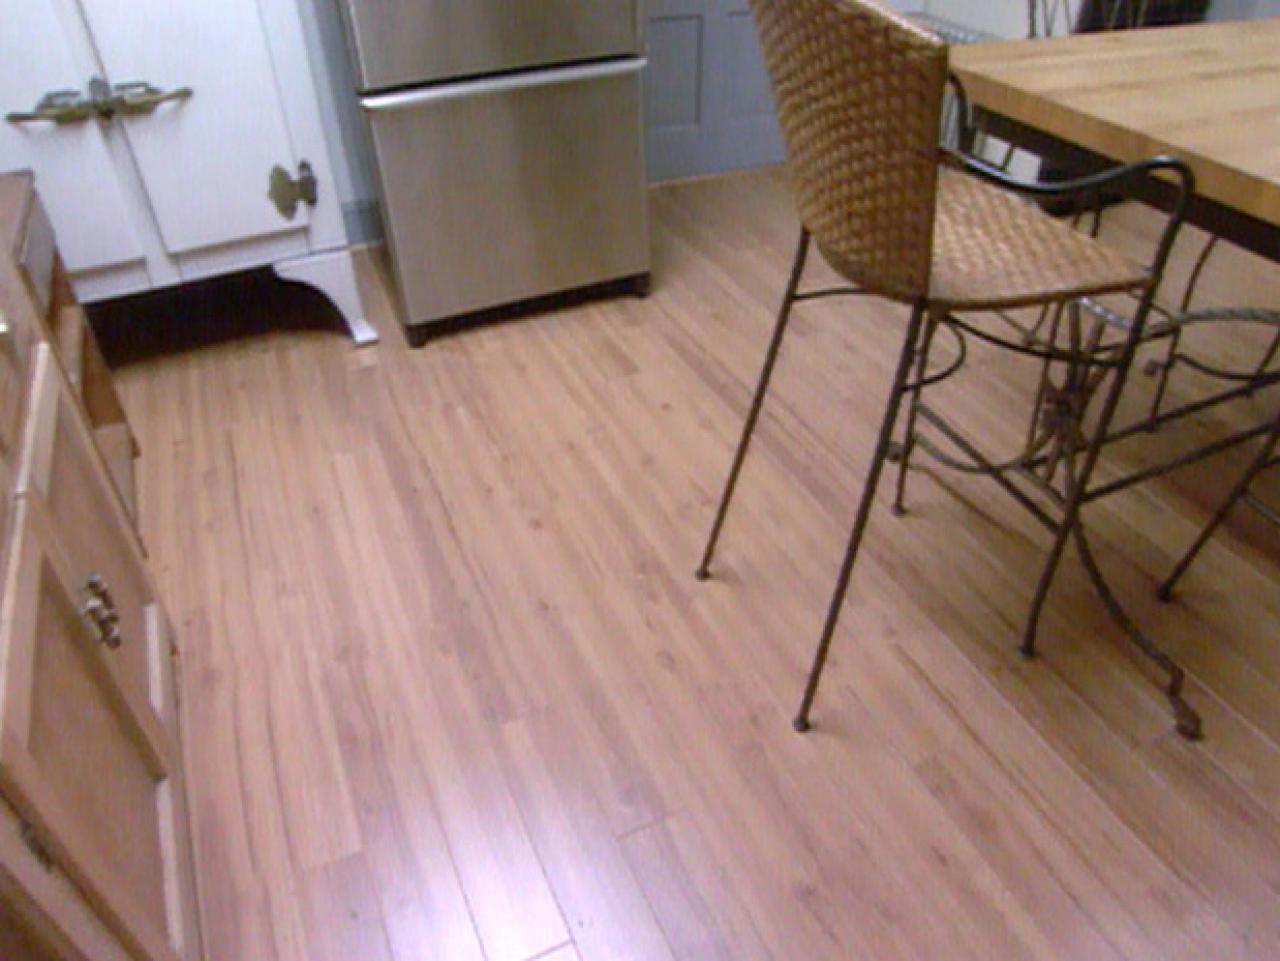 How To Install Laminate Flooring, How To Install Laminate Tile Flooring In Kitchen